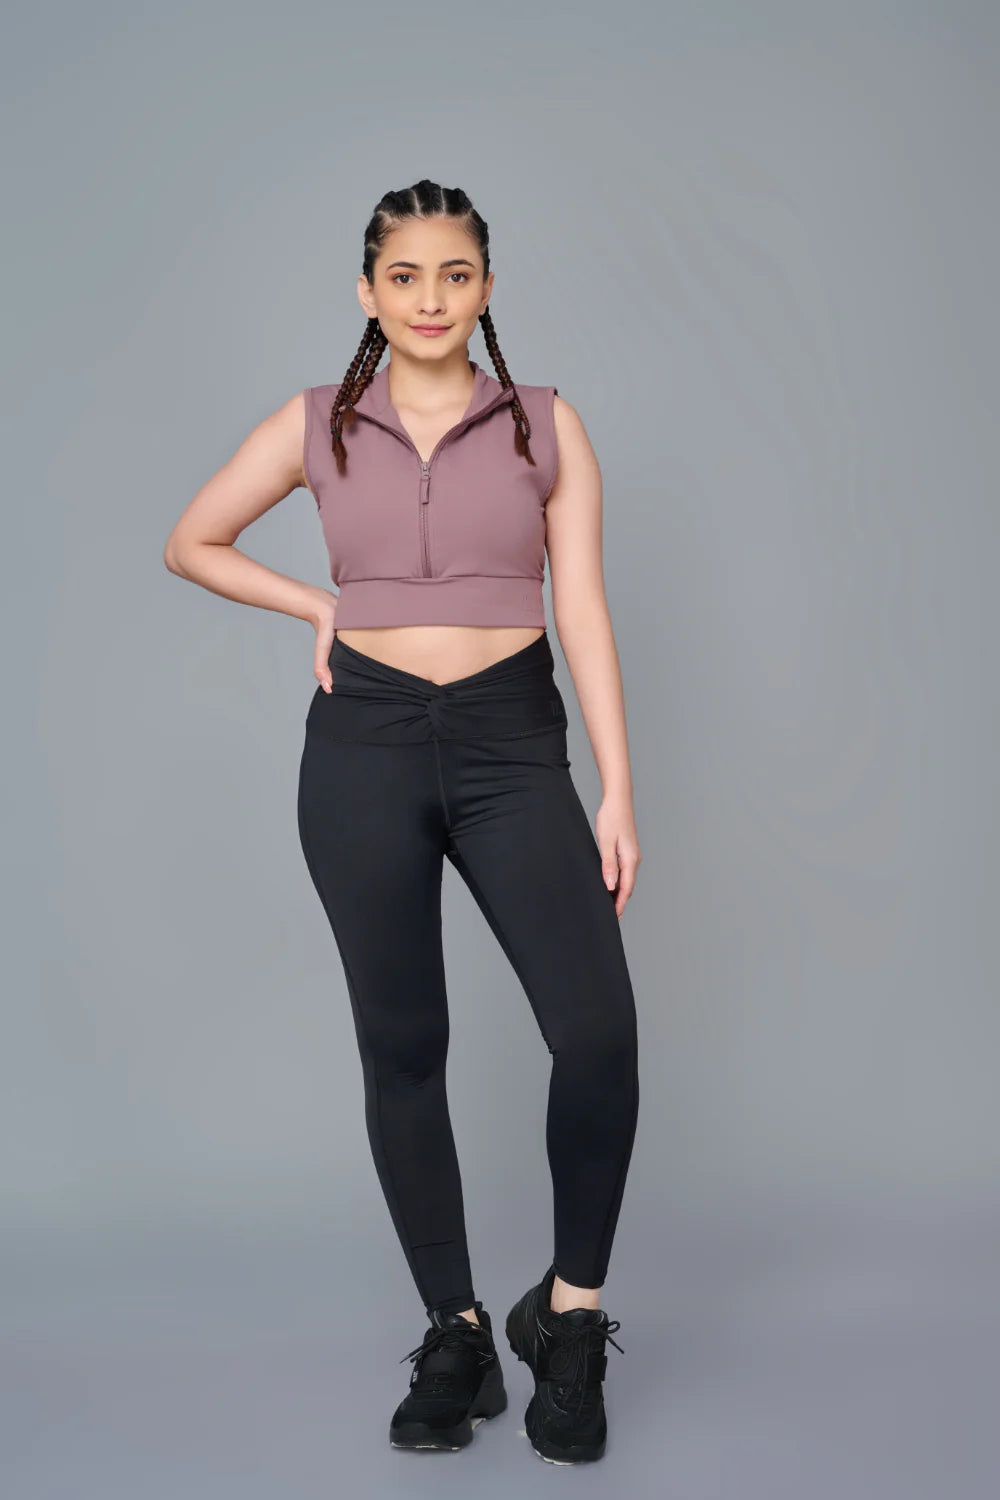 Check It Out Coral Leggings  Boutique Clothing for Women